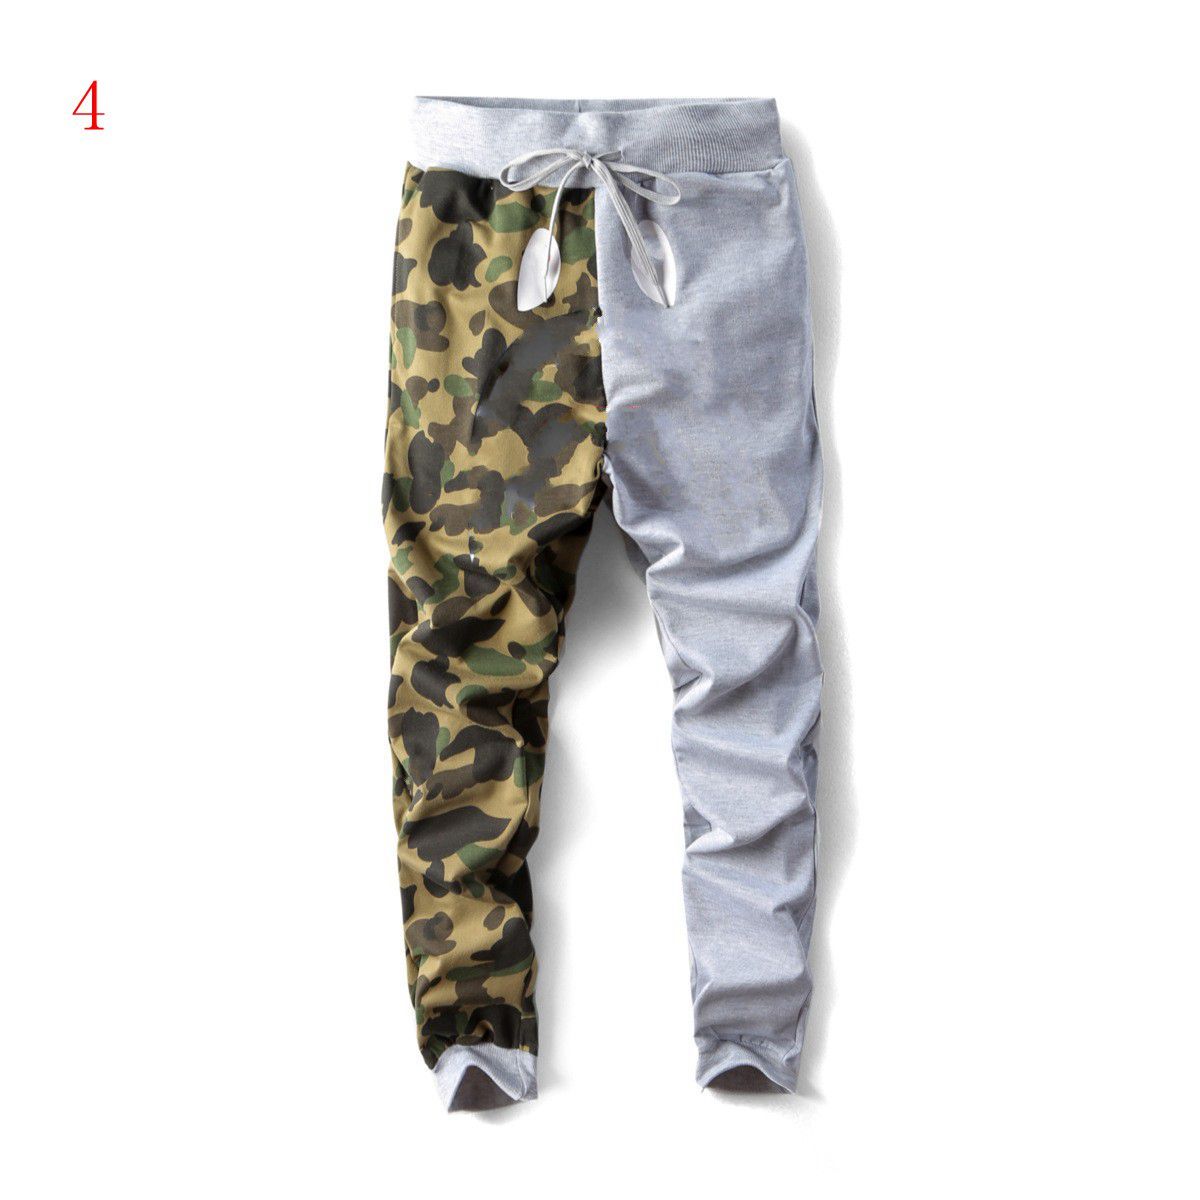 # 4 Gray + Camouflage